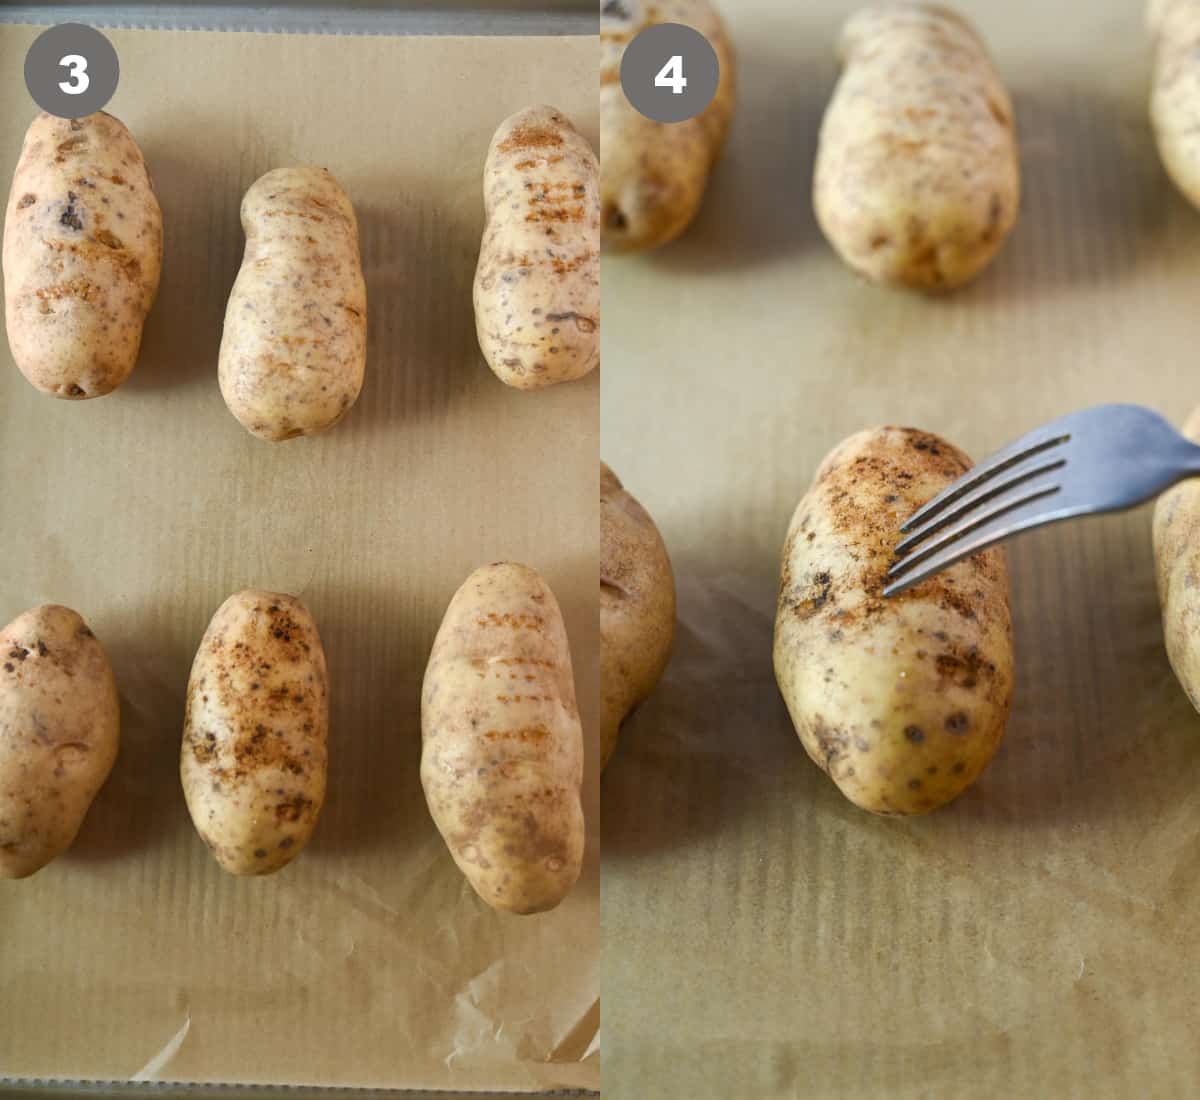 Potatoes washed and poked with a fork.